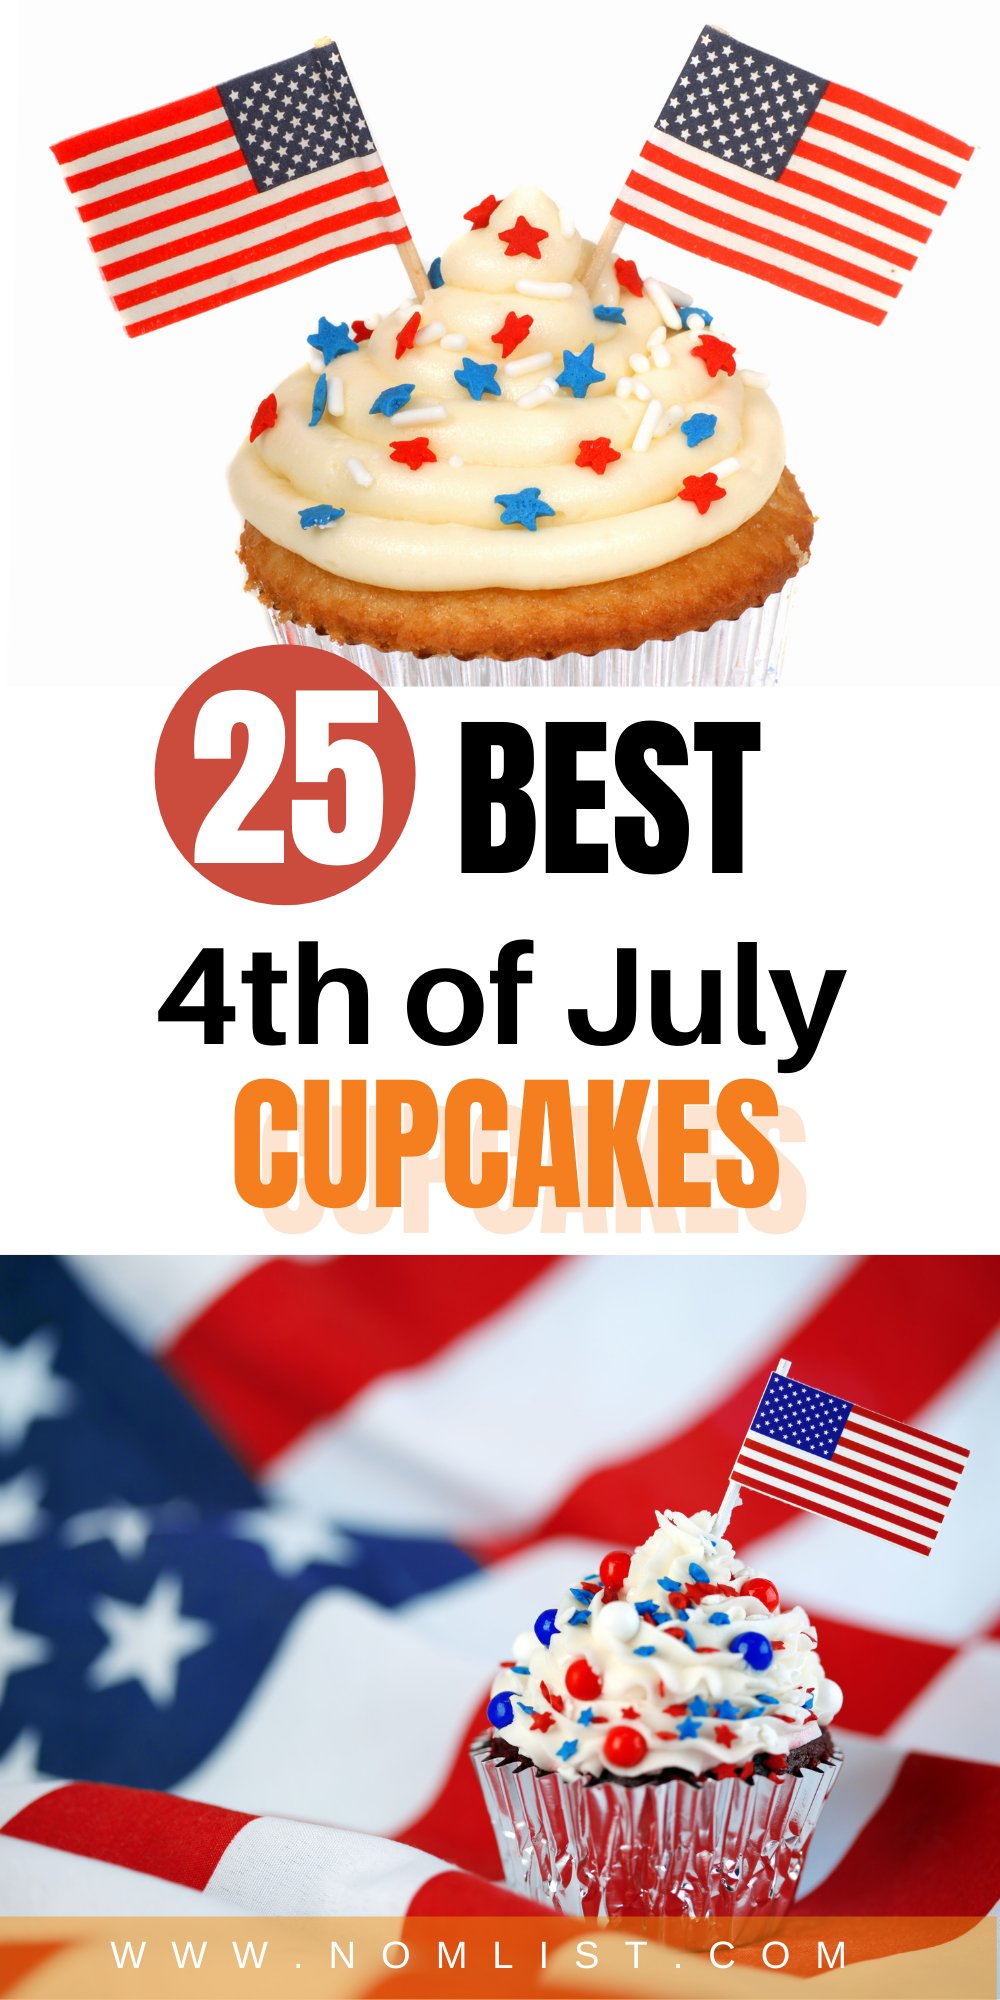 There's no better way to celebrate the 4th of July with something sweet. These delicious 4th of July cupcakes are the perfect baked recipes that will impress your family and friends. Check out the 25 best Fourth of July cupcakes that you will LOVE!